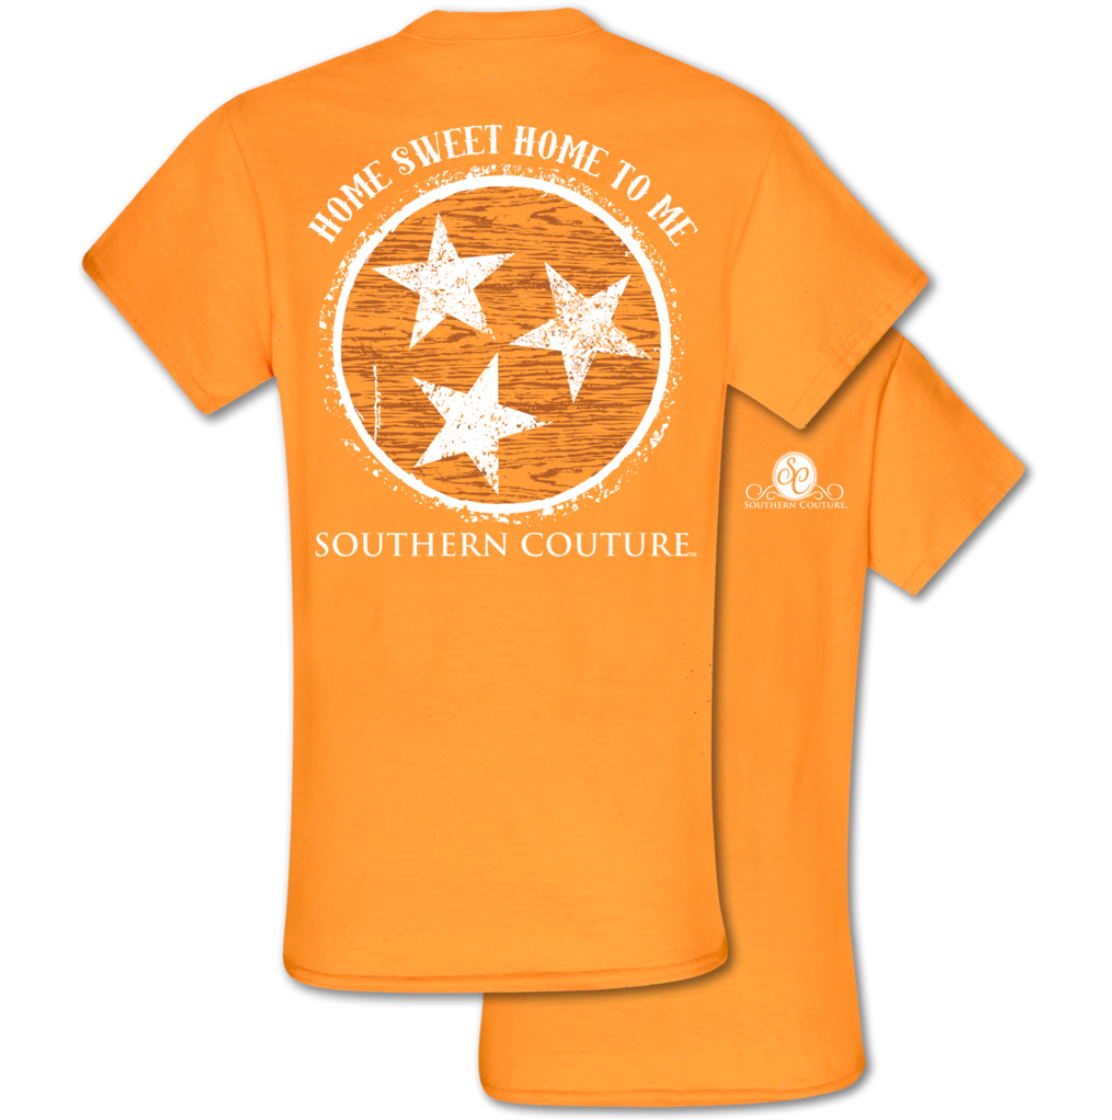 Southern Couture "Home Sweet Home" Tri-Star T